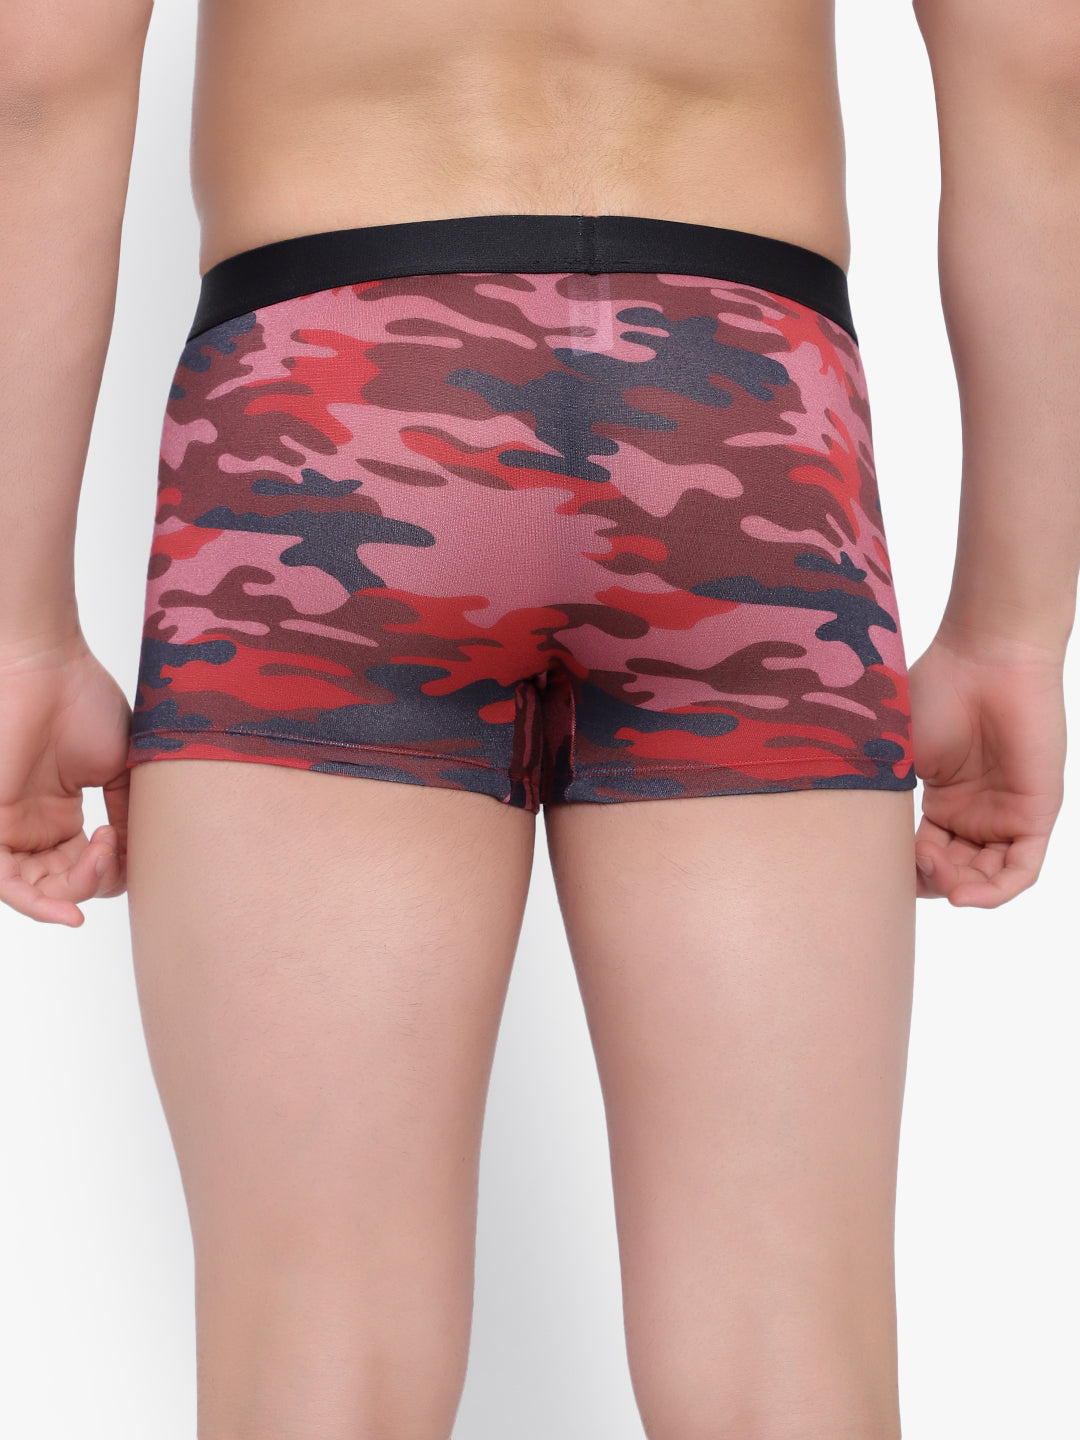 Men's Red camouflage Anti-Bacterial Micro Modal Trunks